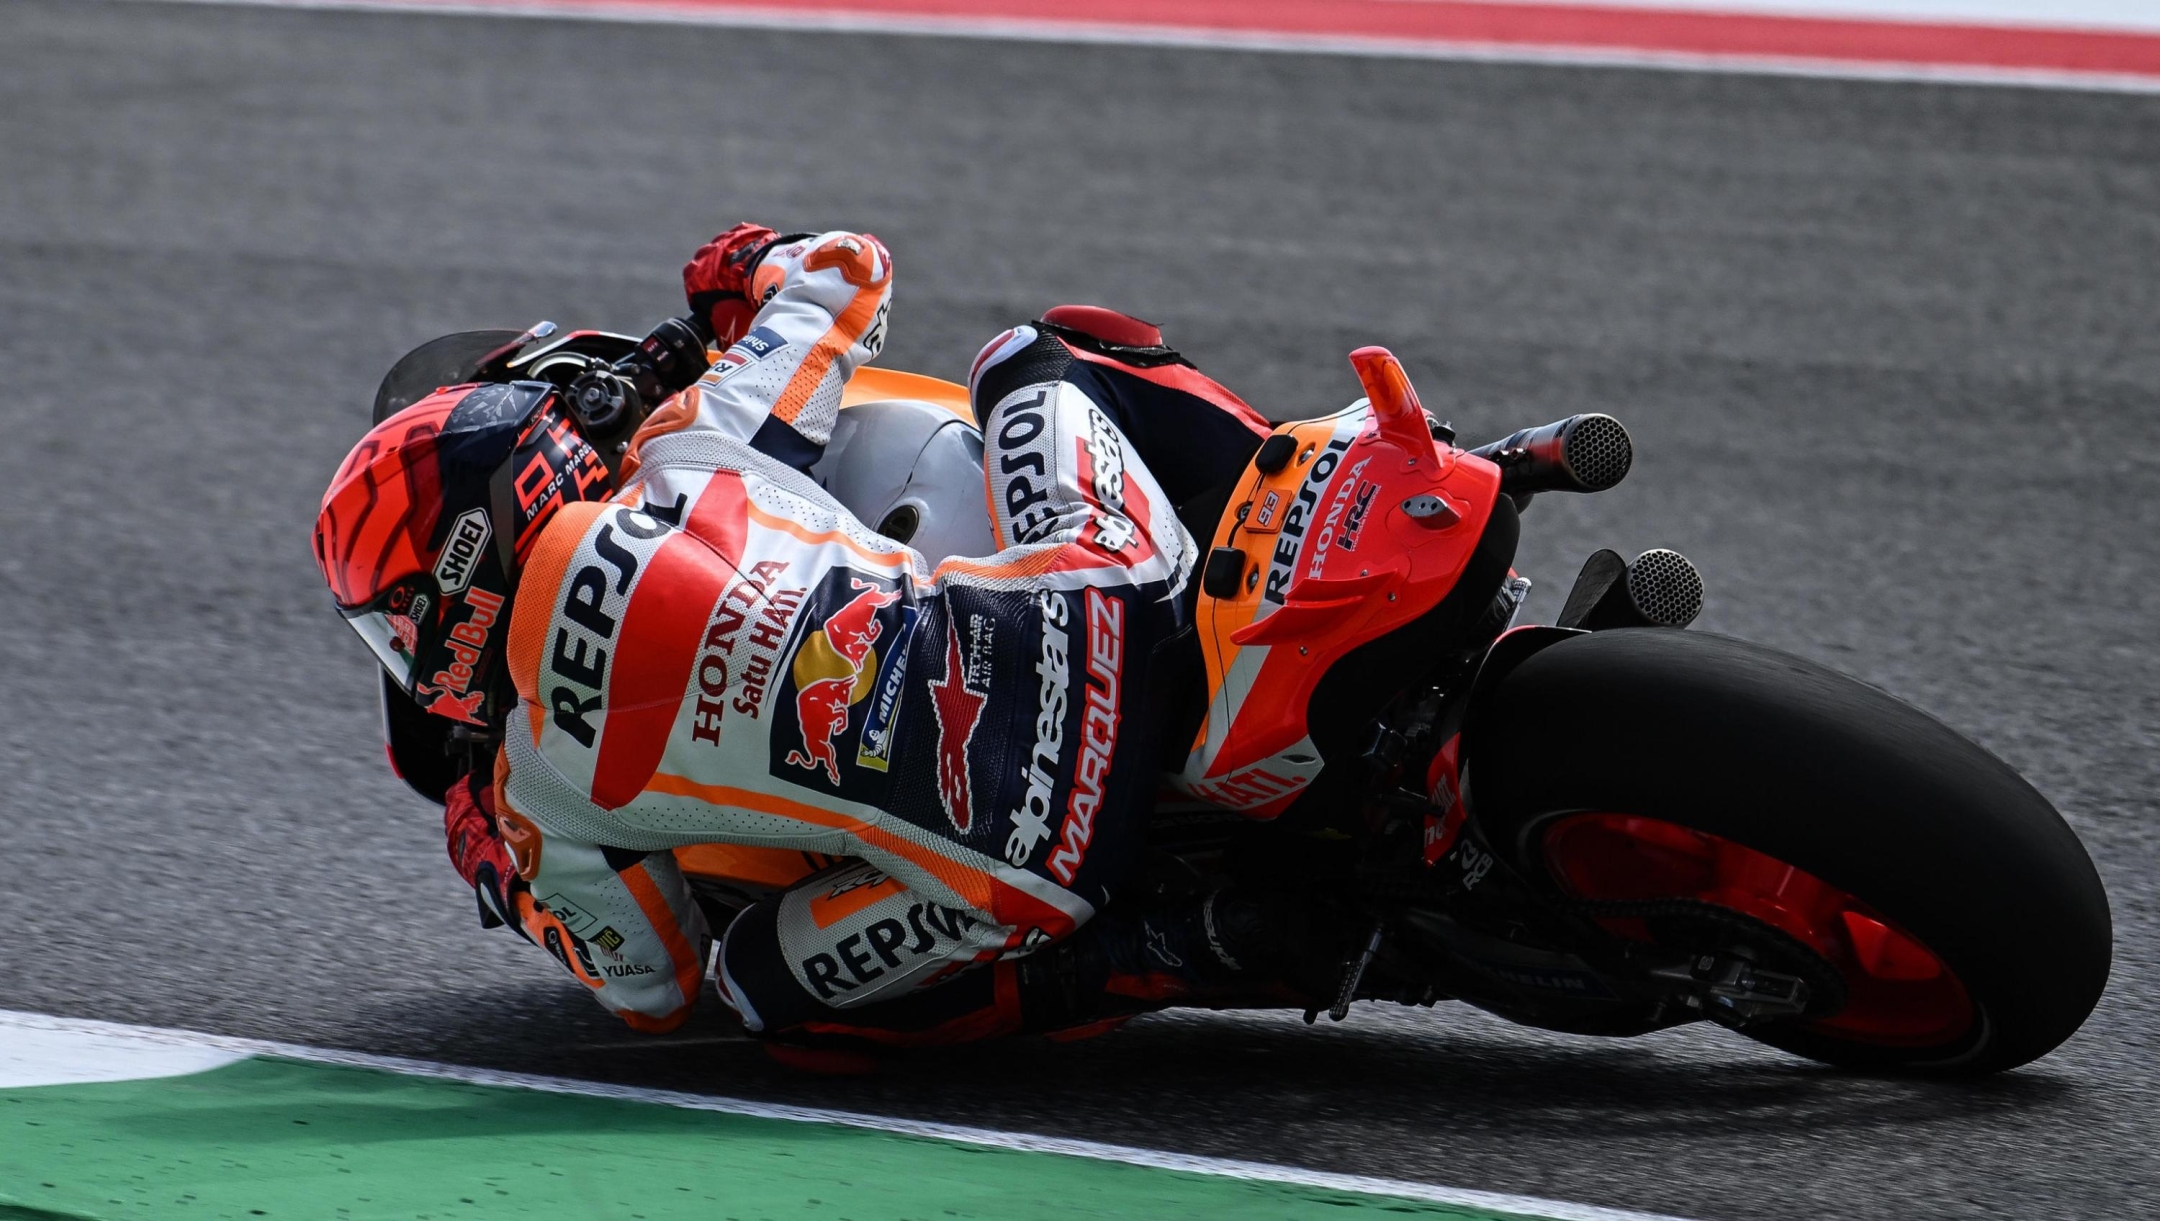 Spanish rider Marc Marquez of Repsol Honda Team in action during the free practice session of the Motorcycling Grand Prix of Italy at the Mugello circuit in Scarperia, central Italy, 9 June 2023. ANSA/CLAUDIO GIOVANNINI